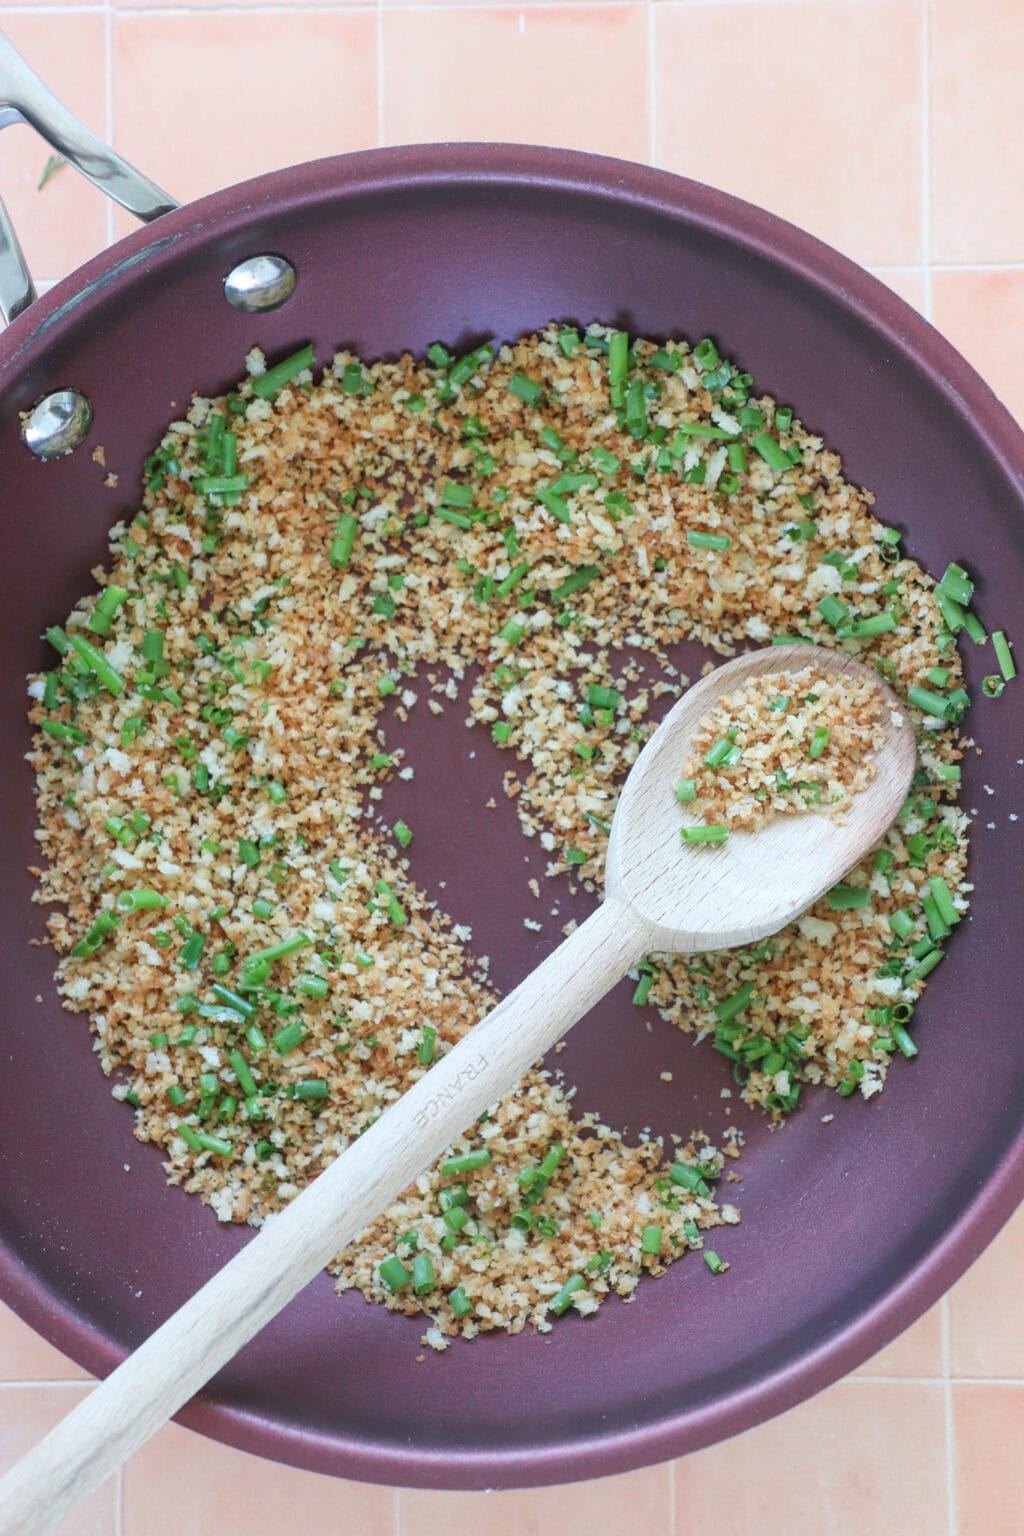 Panko bread crumbs and chives in a red pan being stirred